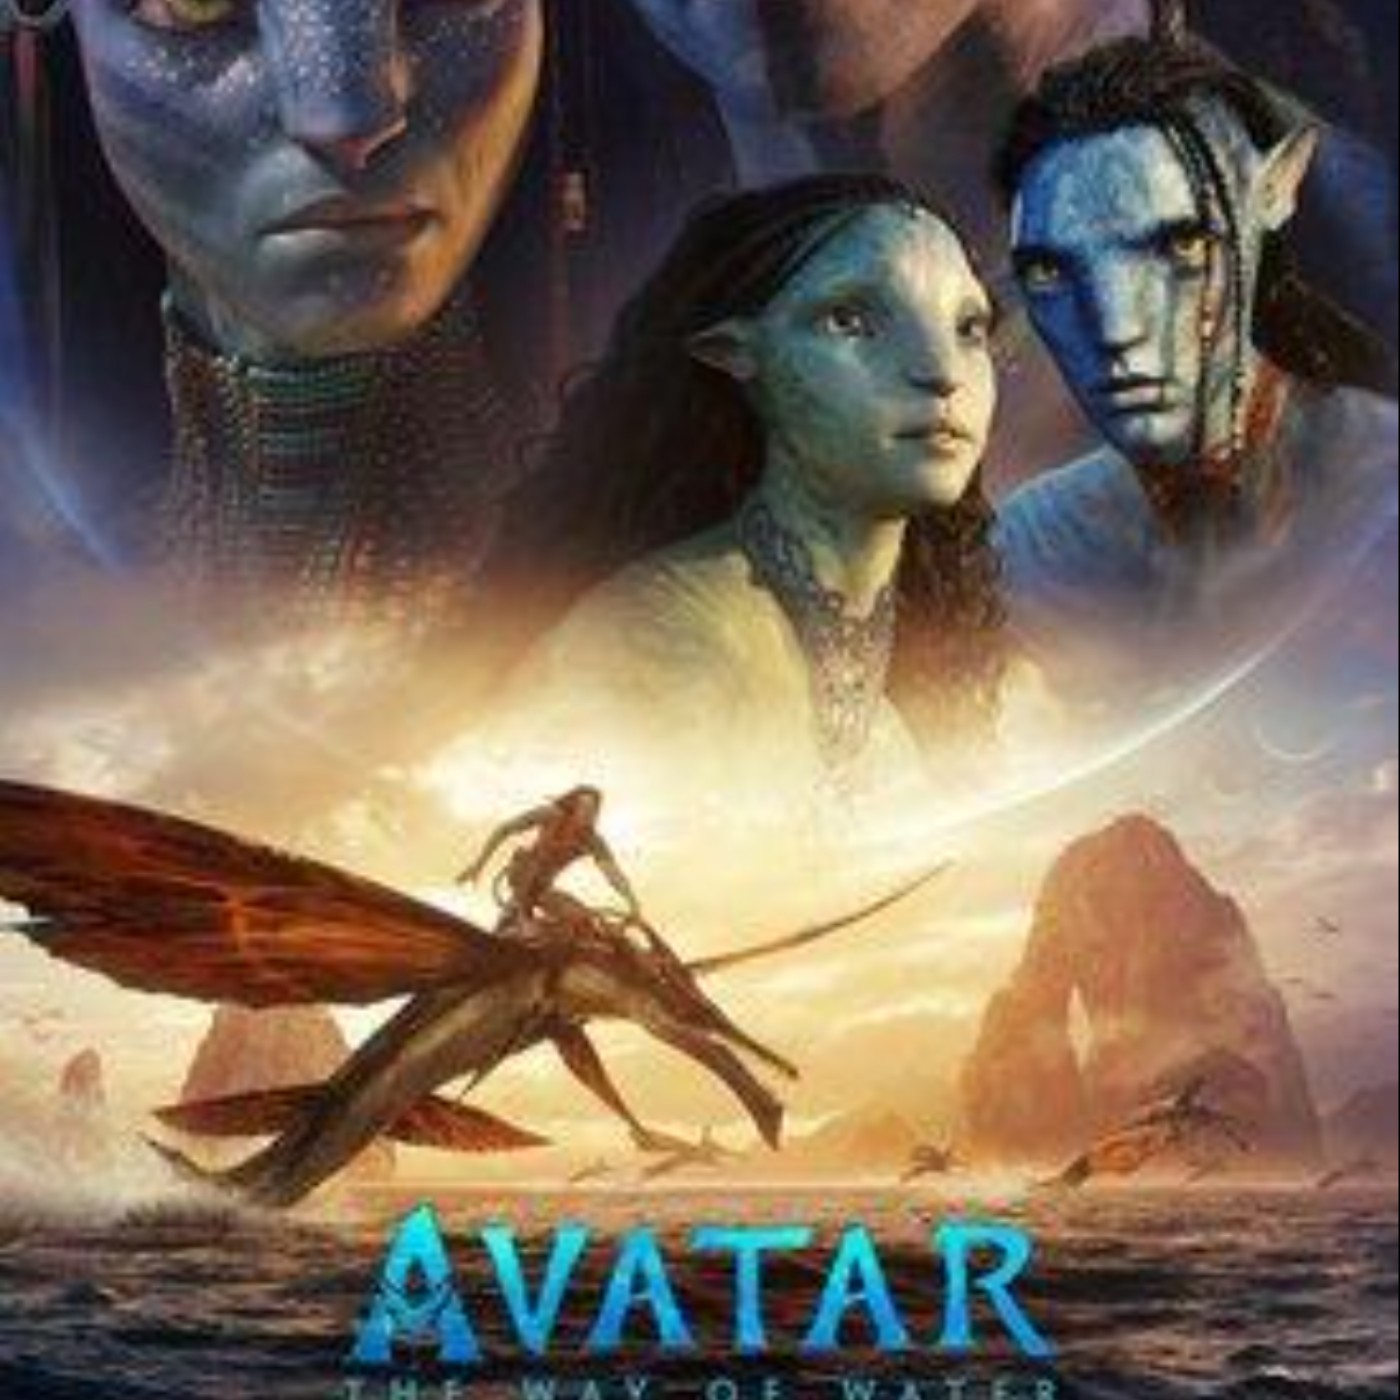 Avatar 2 The Way of Water (HINDI DUBBED) FULLMovie Download Free 720p, 480p  and 1080P HD | Podcast on SoundOn